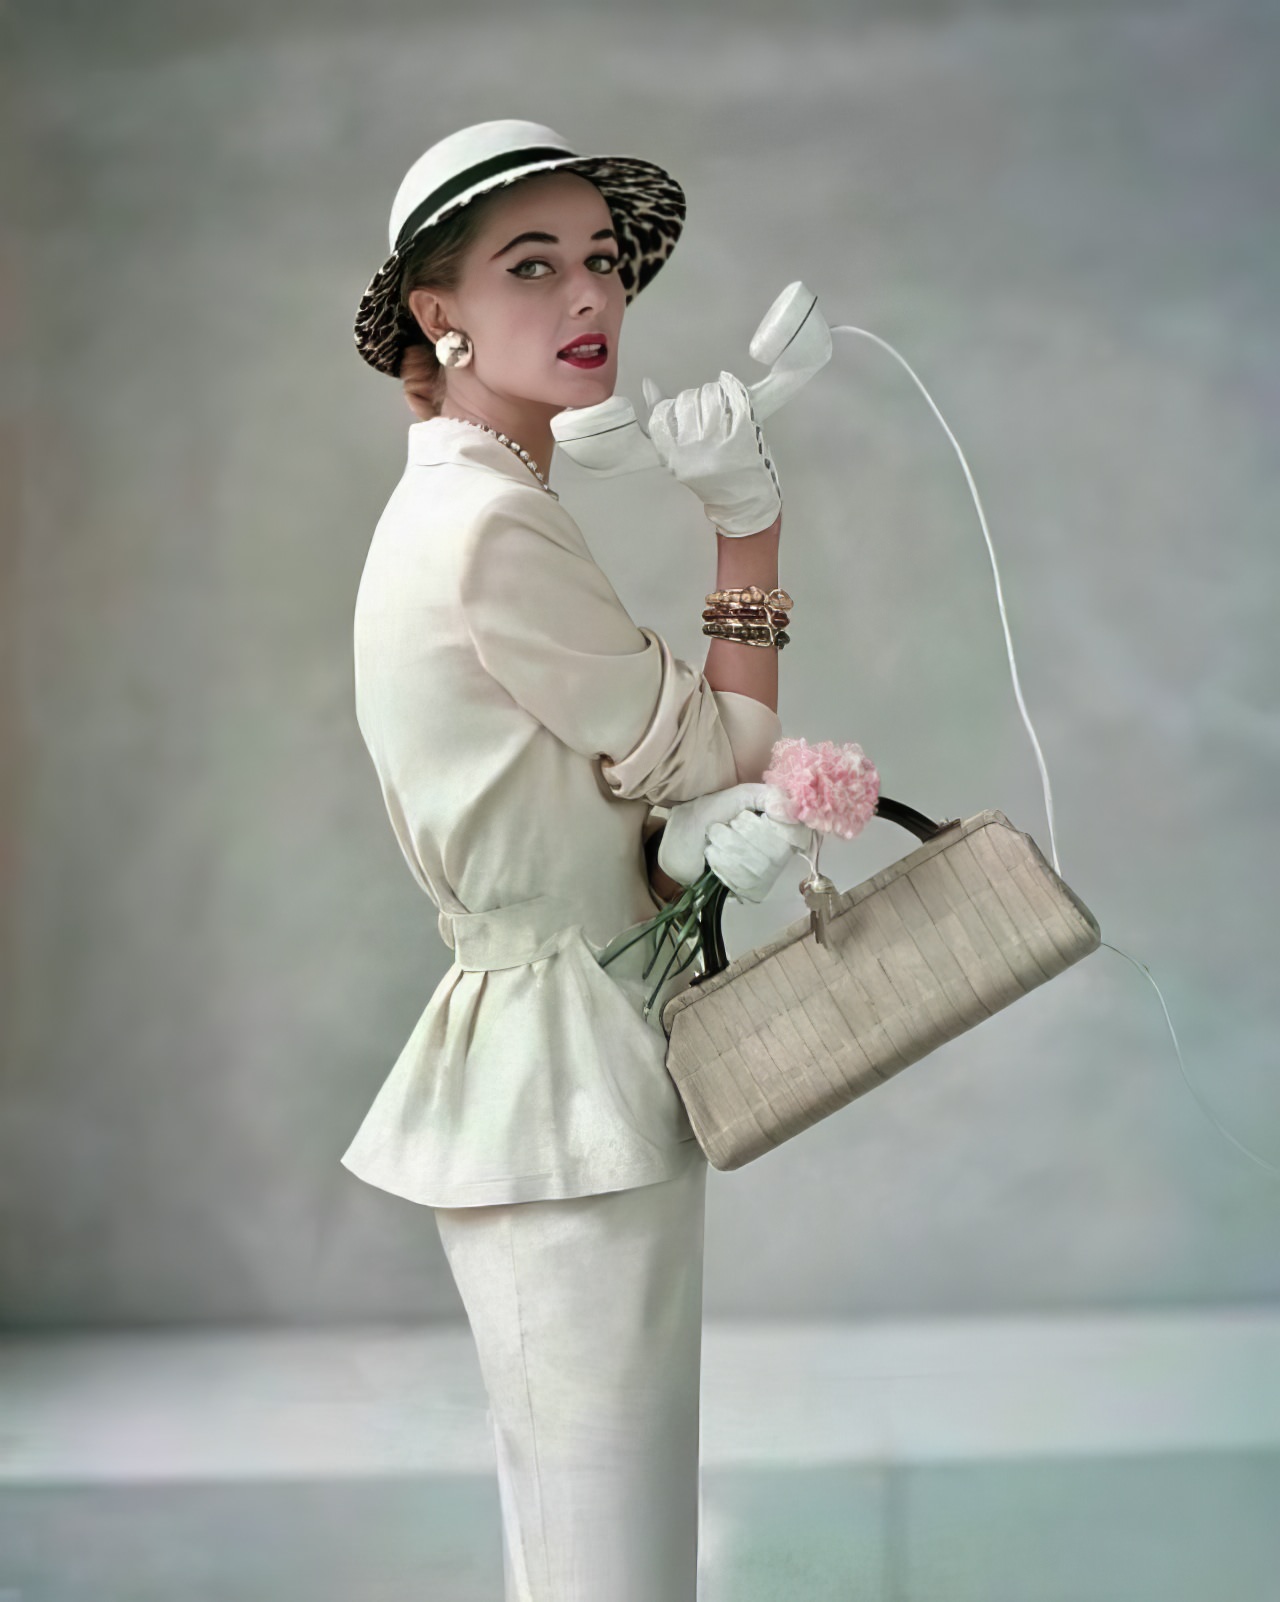 Carol McCallson in a classic suit by Handmacher, Glamour, April 1953.